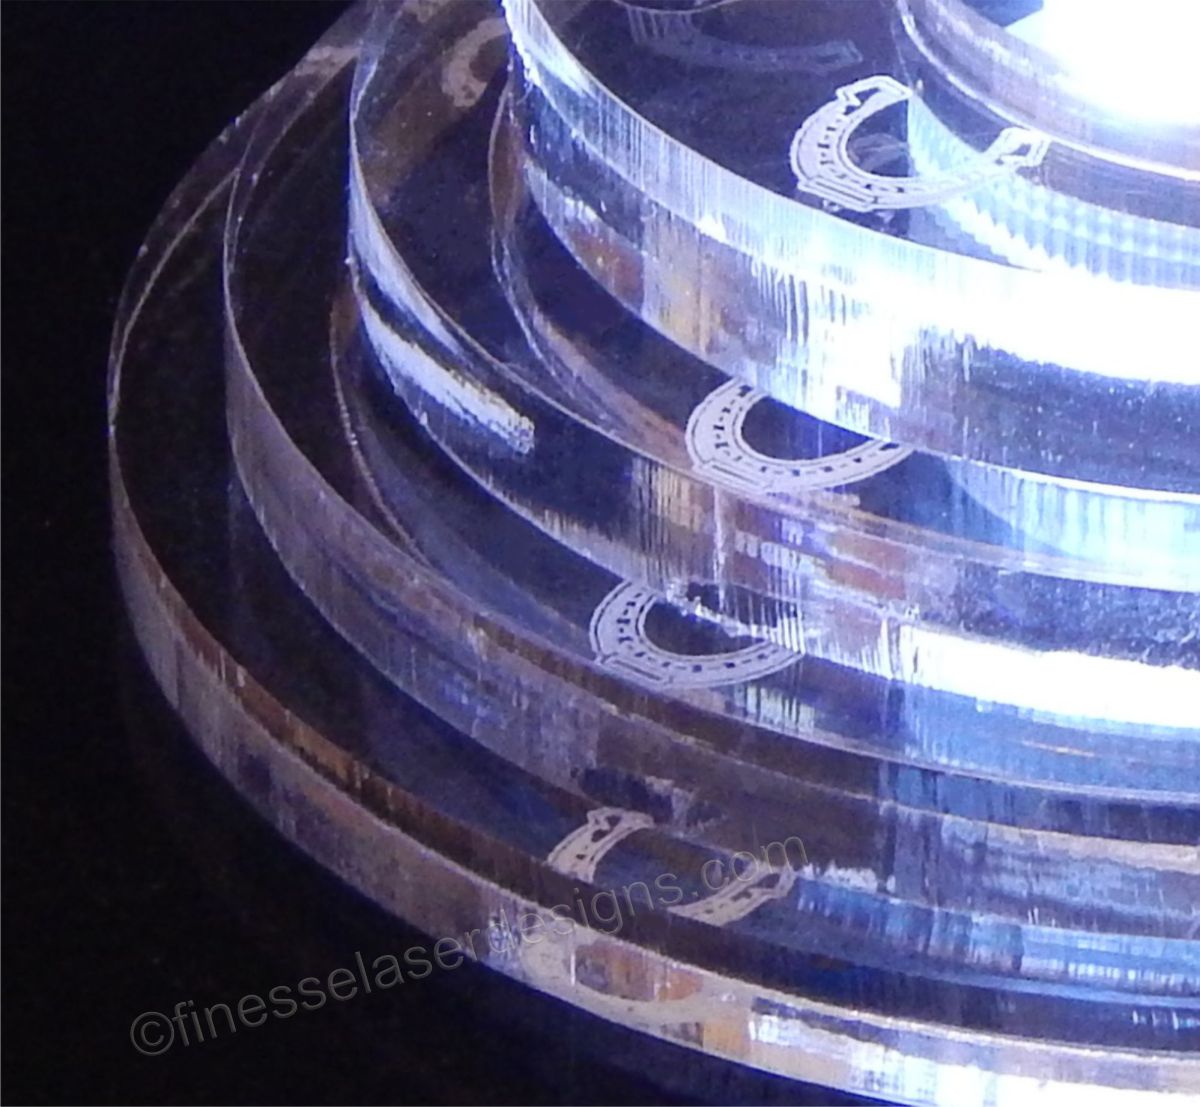 partial view of an acrylic round tiered base for a cake topper with a horseshoe design on each tier